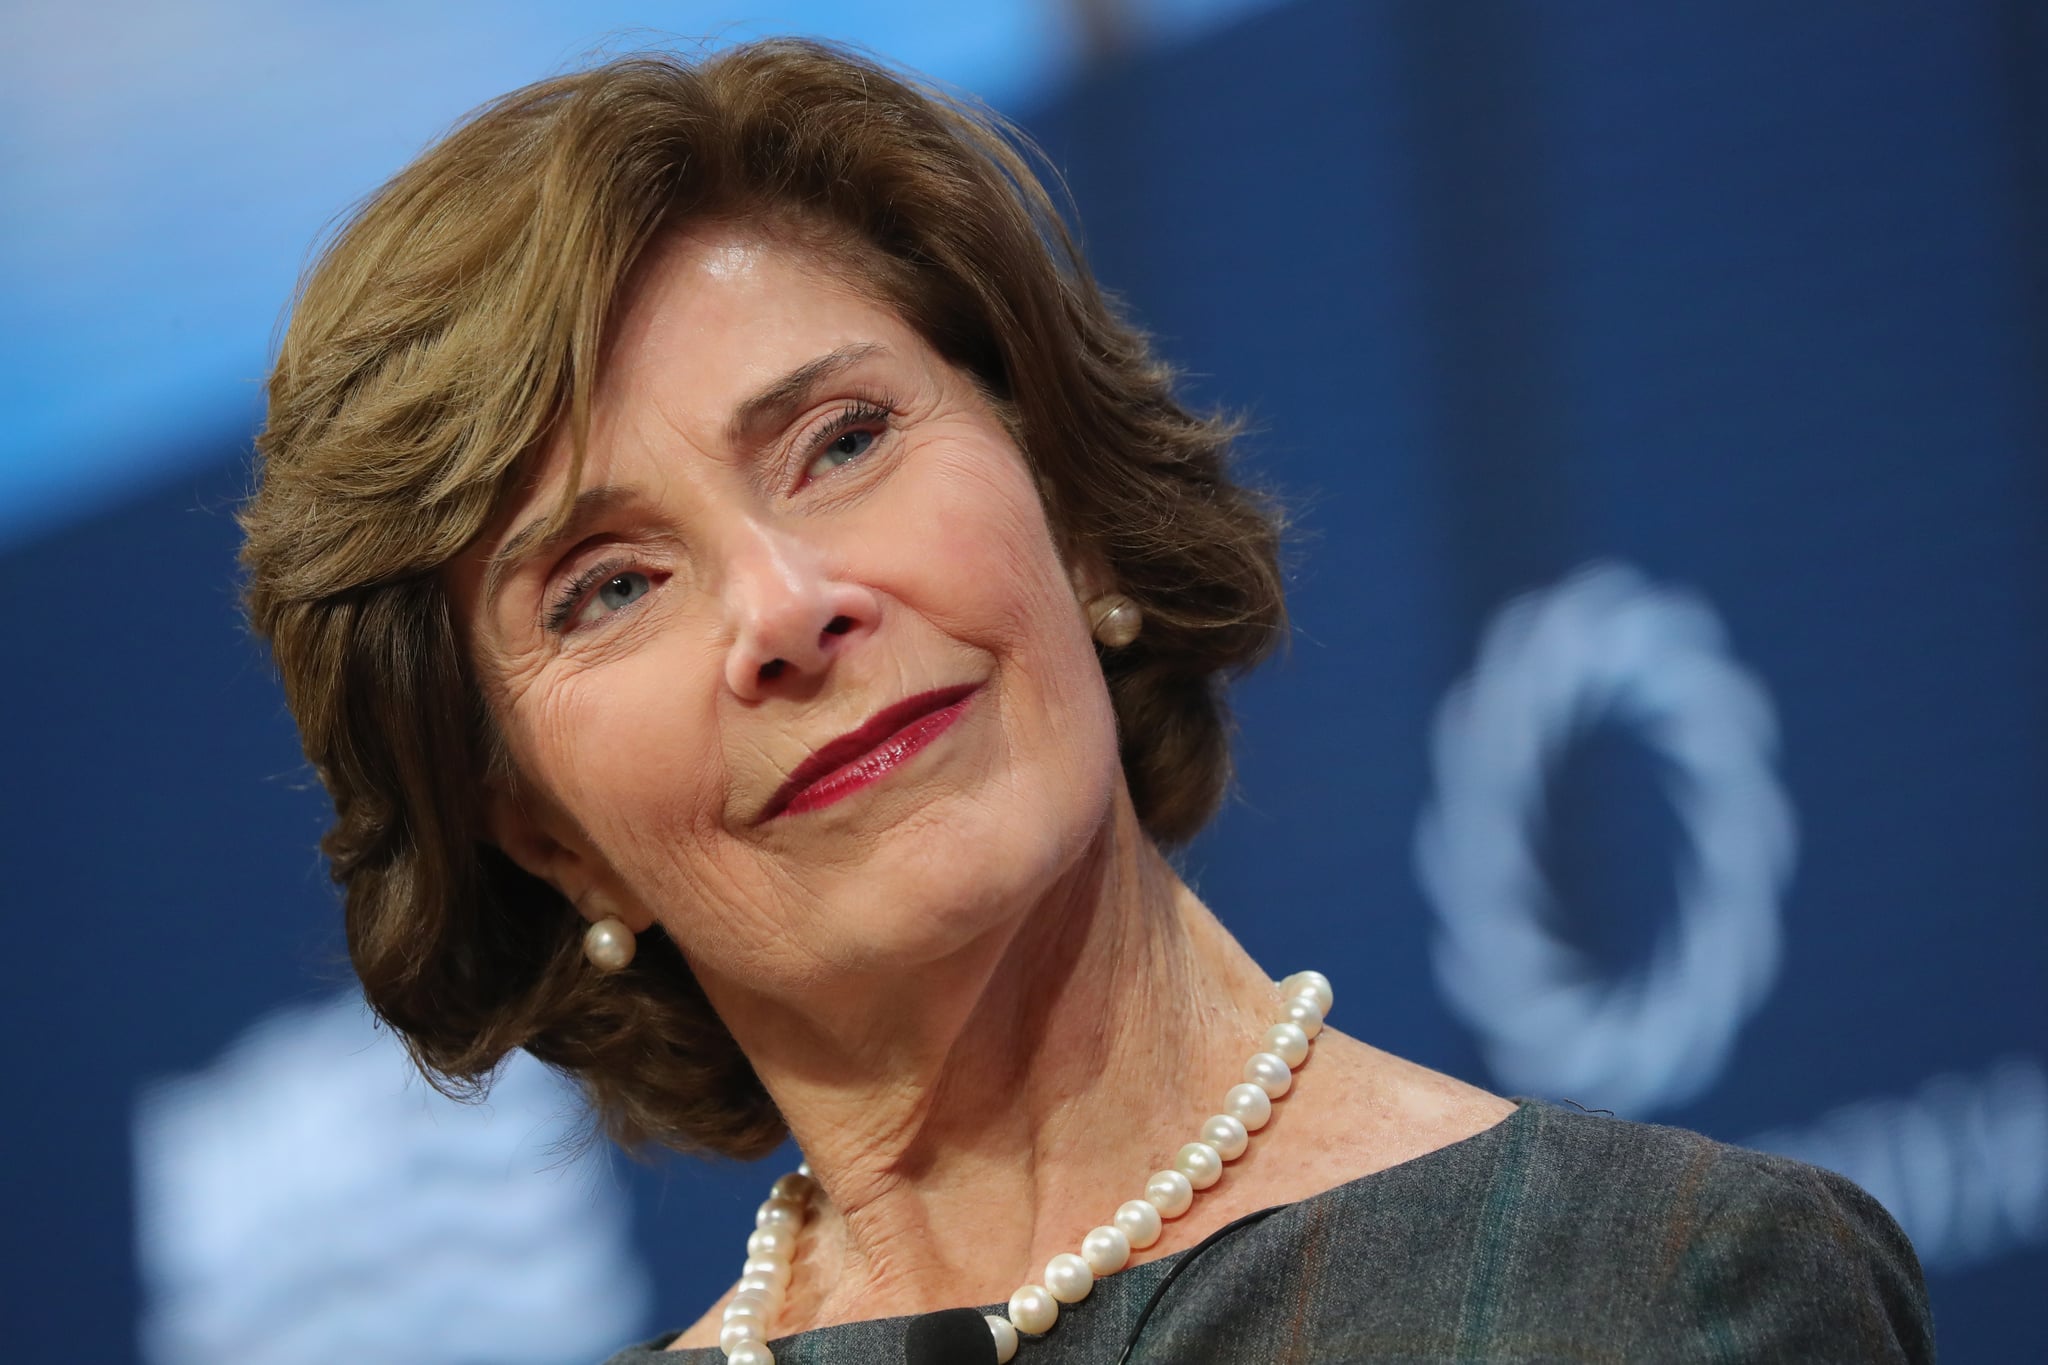 NEW YORK, NY - SEPTEMBER 18:  Laura Bush, Former First Lady, United States of America, speaks at The 2017 Concordia Annual Summit at Grand Hyatt New York on September 18, 2017 in New York City.  (Photo by Paul Morigi/Getty Images for Concordia Summit)